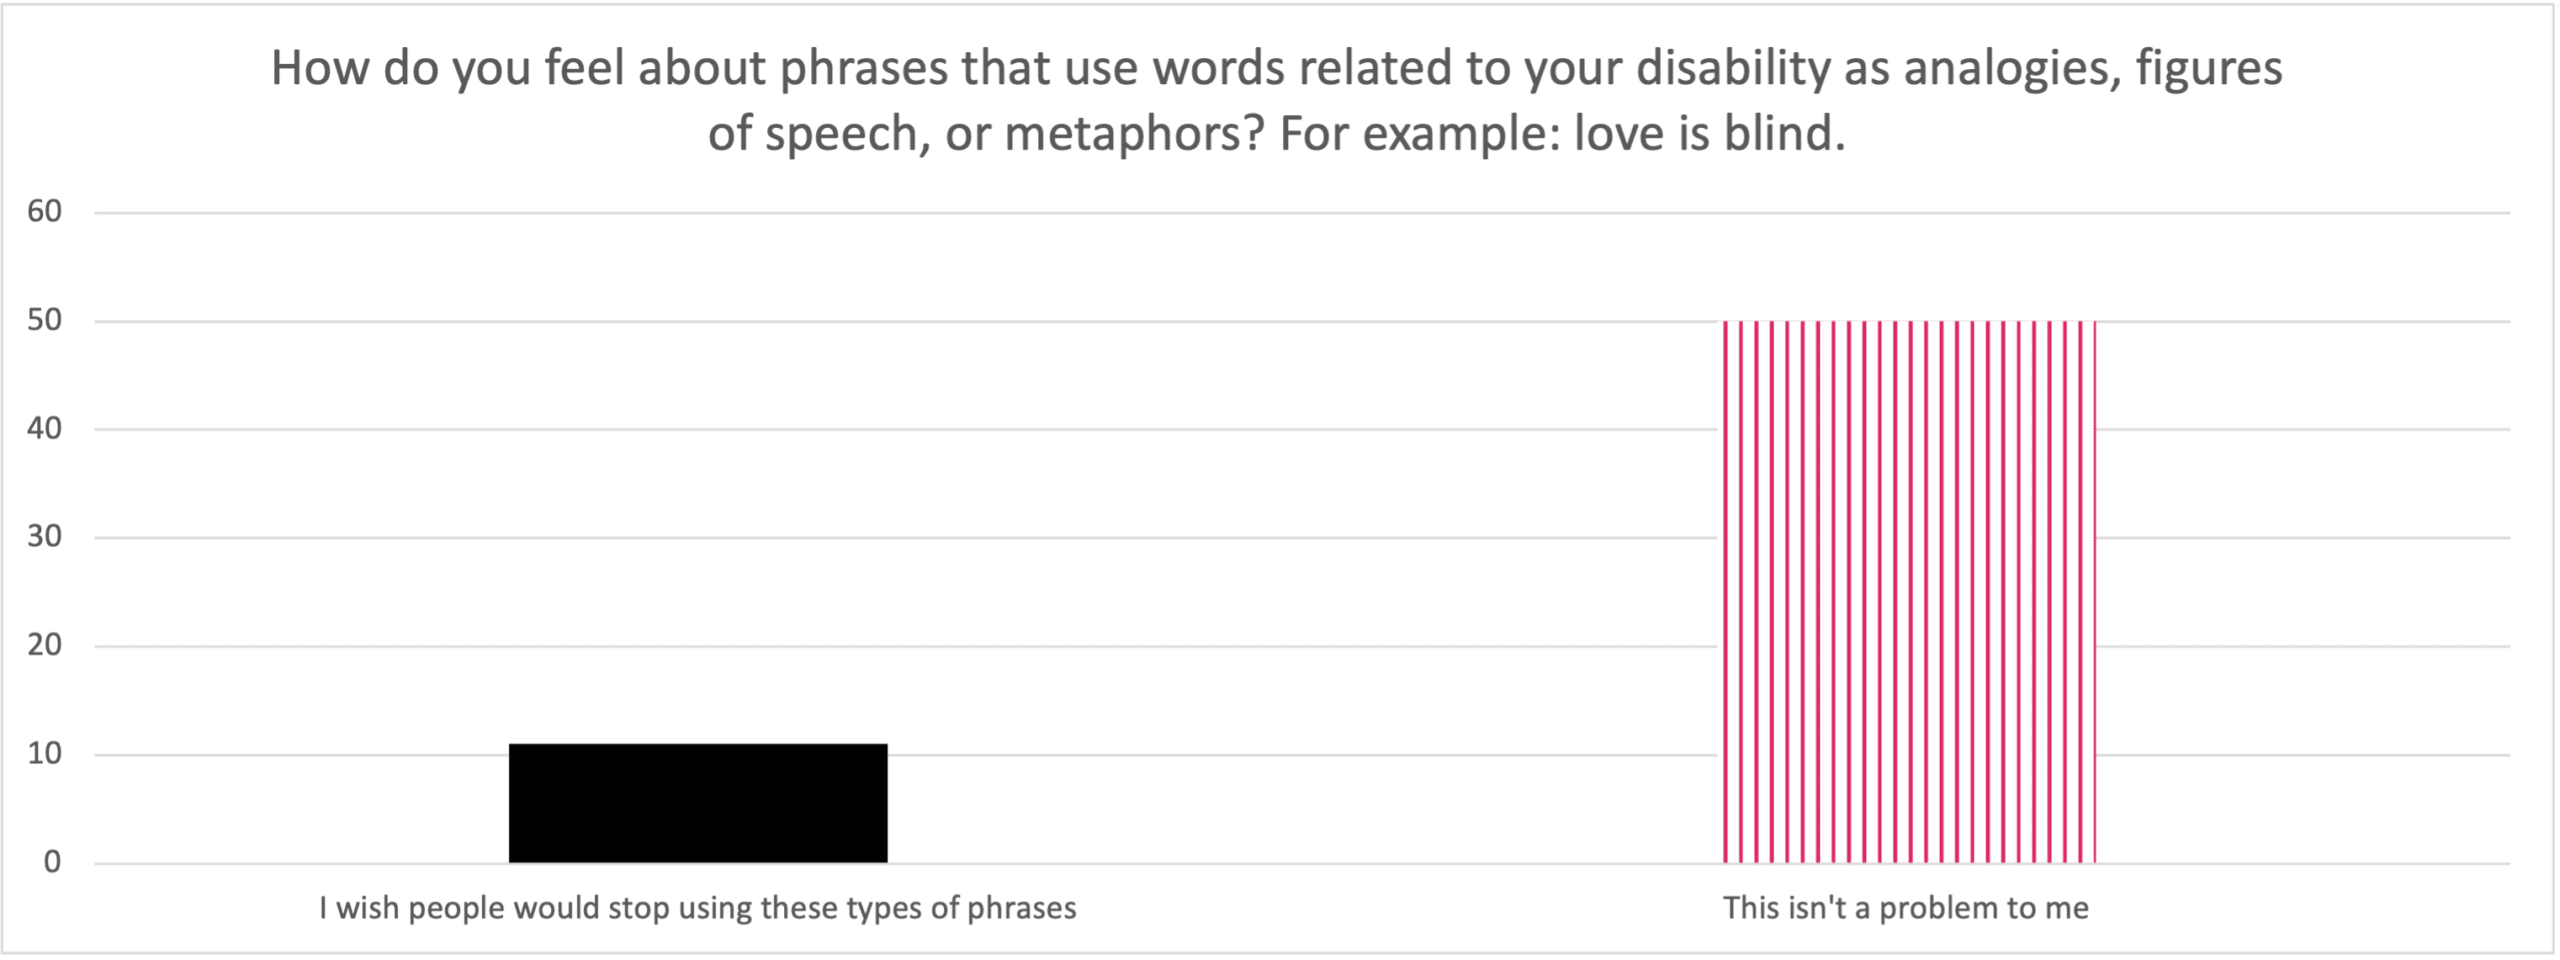 How do you feel about phrases that use words related to your disability as analogies, figures of speech, or metaphors? For example: love is blind. 50 people say this isn't a problem and just over 10 say they wish people would stop using these phrases.